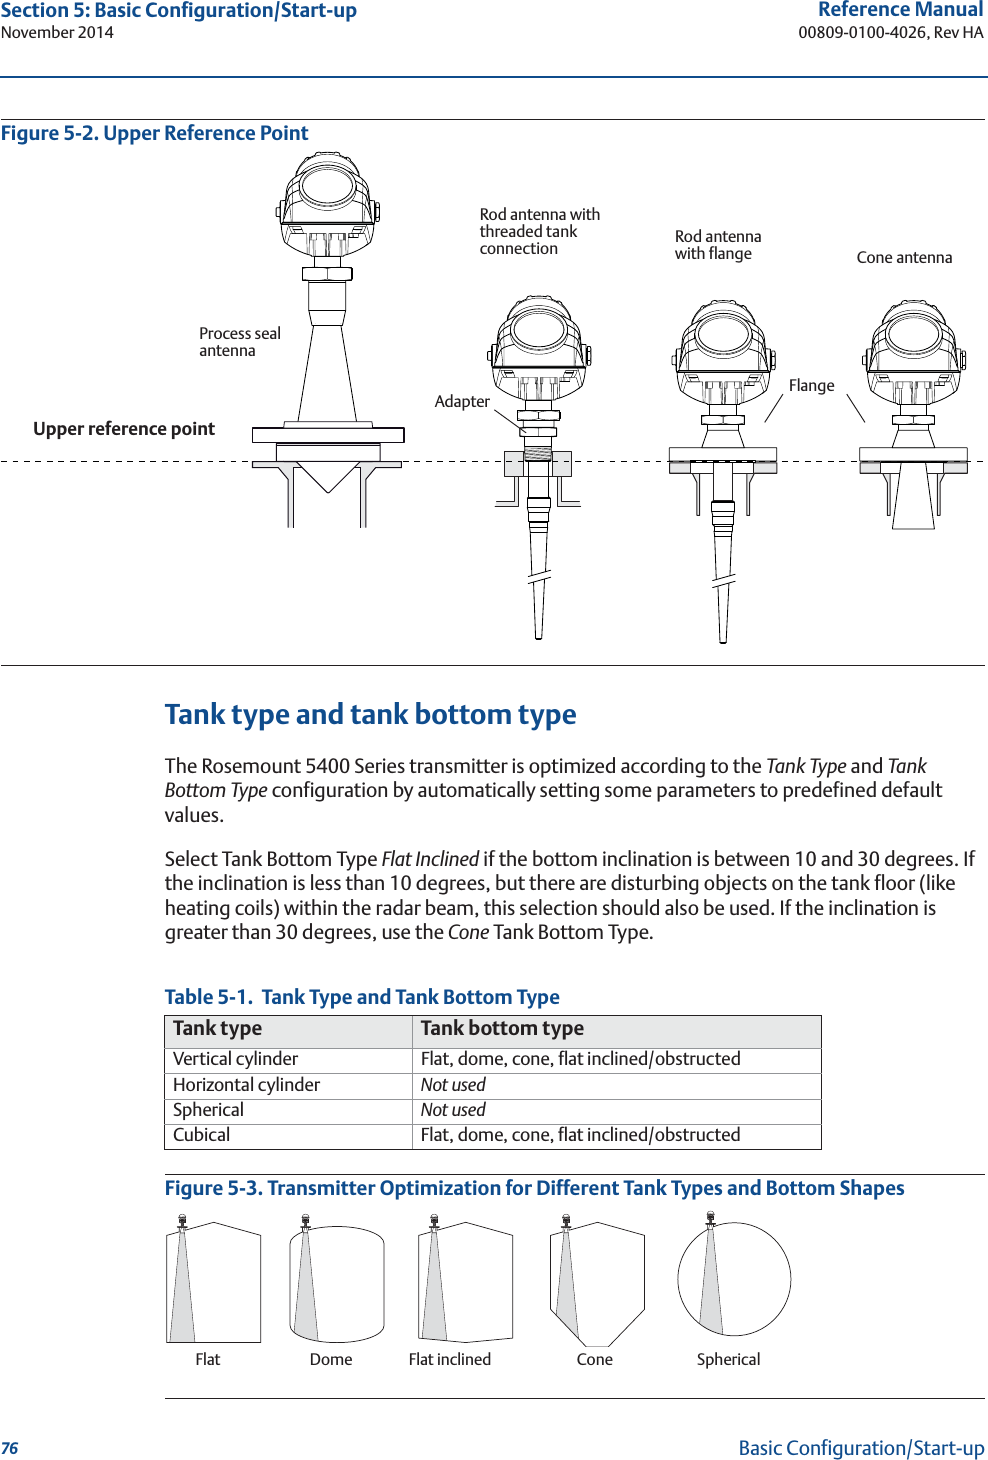 76Reference Manual00809-0100-4026, Rev HASection 5: Basic Configuration/Start-upNovember 2014Basic Configuration/Start-upFigure 5-2. Upper Reference PointTank type and tank bottom typeThe Rosemount 5400 Series transmitter is optimized according to the Tank Type and Tan k Bottom Type configuration by automatically setting some parameters to predefined default values. Select Tank Bottom Type Flat Inclined if the bottom inclination is between 10 and 30 degrees. If the inclination is less than 10 degrees, but there are disturbing objects on the tank floor (like heating coils) within the radar beam, this selection should also be used. If the inclination is greater than 30 degrees, use the Cone Tank Bottom Type.Table 5-1.  Tank Type and Tank Bottom TypeFigure 5-3. Transmitter Optimization for Different Tank Types and Bottom ShapesTank type Tank bottom typeVertical cylinder Flat, dome, cone, flat inclined/obstructedHorizontal cylinder Not usedSpherical Not usedCubical Flat, dome, cone, flat inclined/obstructedCone antennaRod antenna with flangeRod antenna with threaded tank connectionUpper reference pointAdapter FlangeProcess seal antennaFlat Dome ConeFlat inclined Spherical